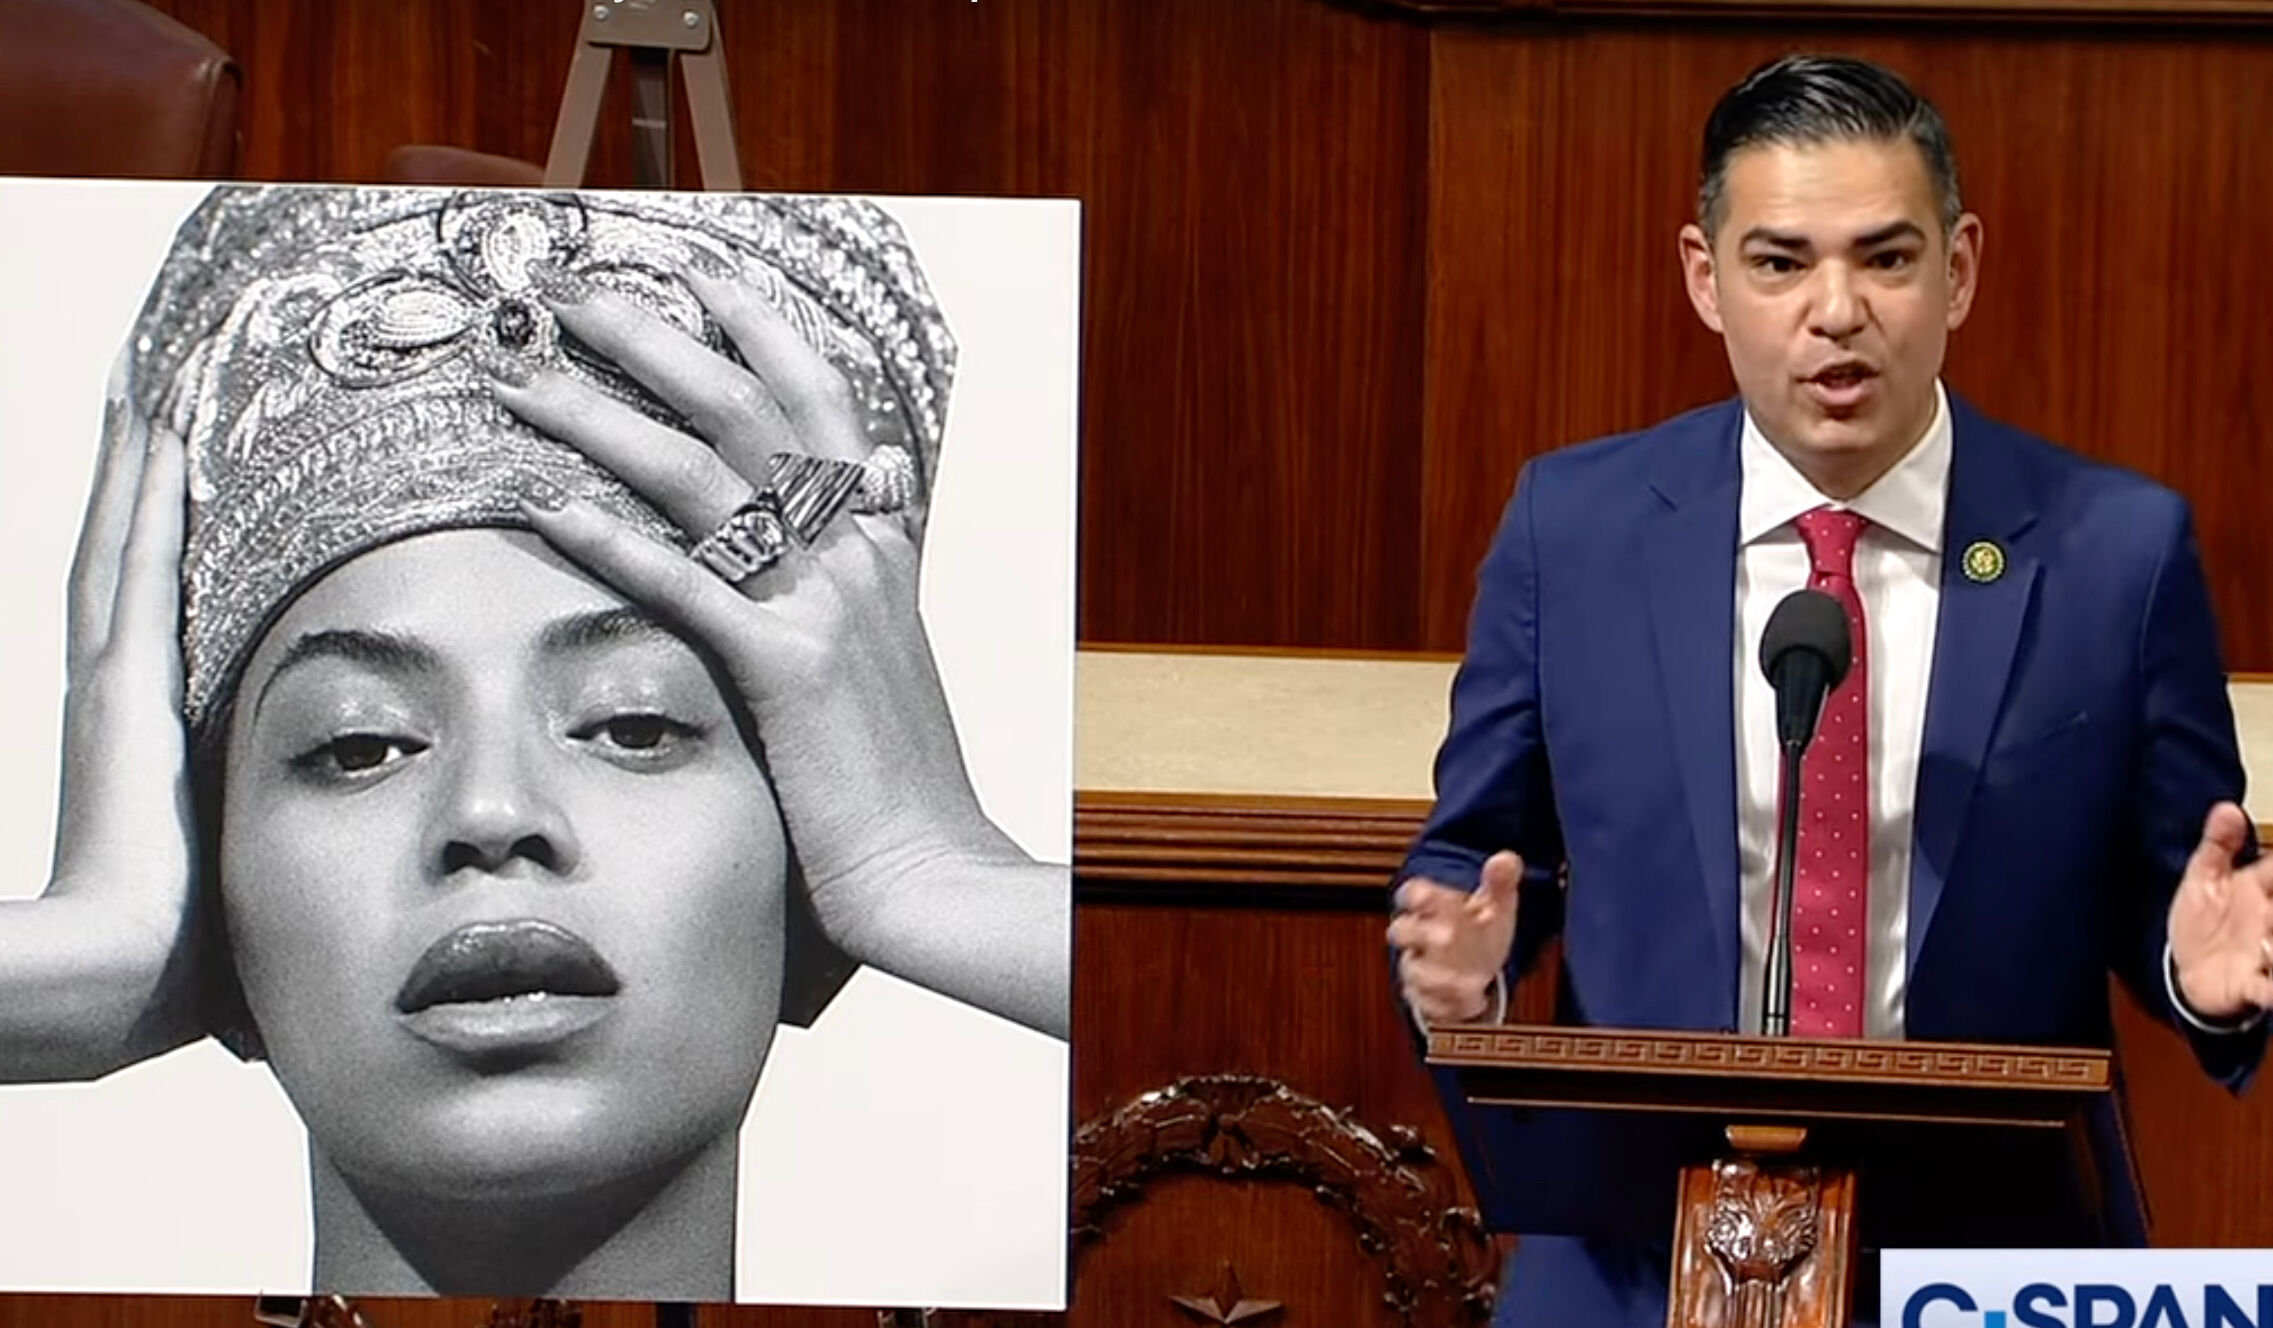 Out congressman gave an impassioned tribute to Beyoncé on the House floor